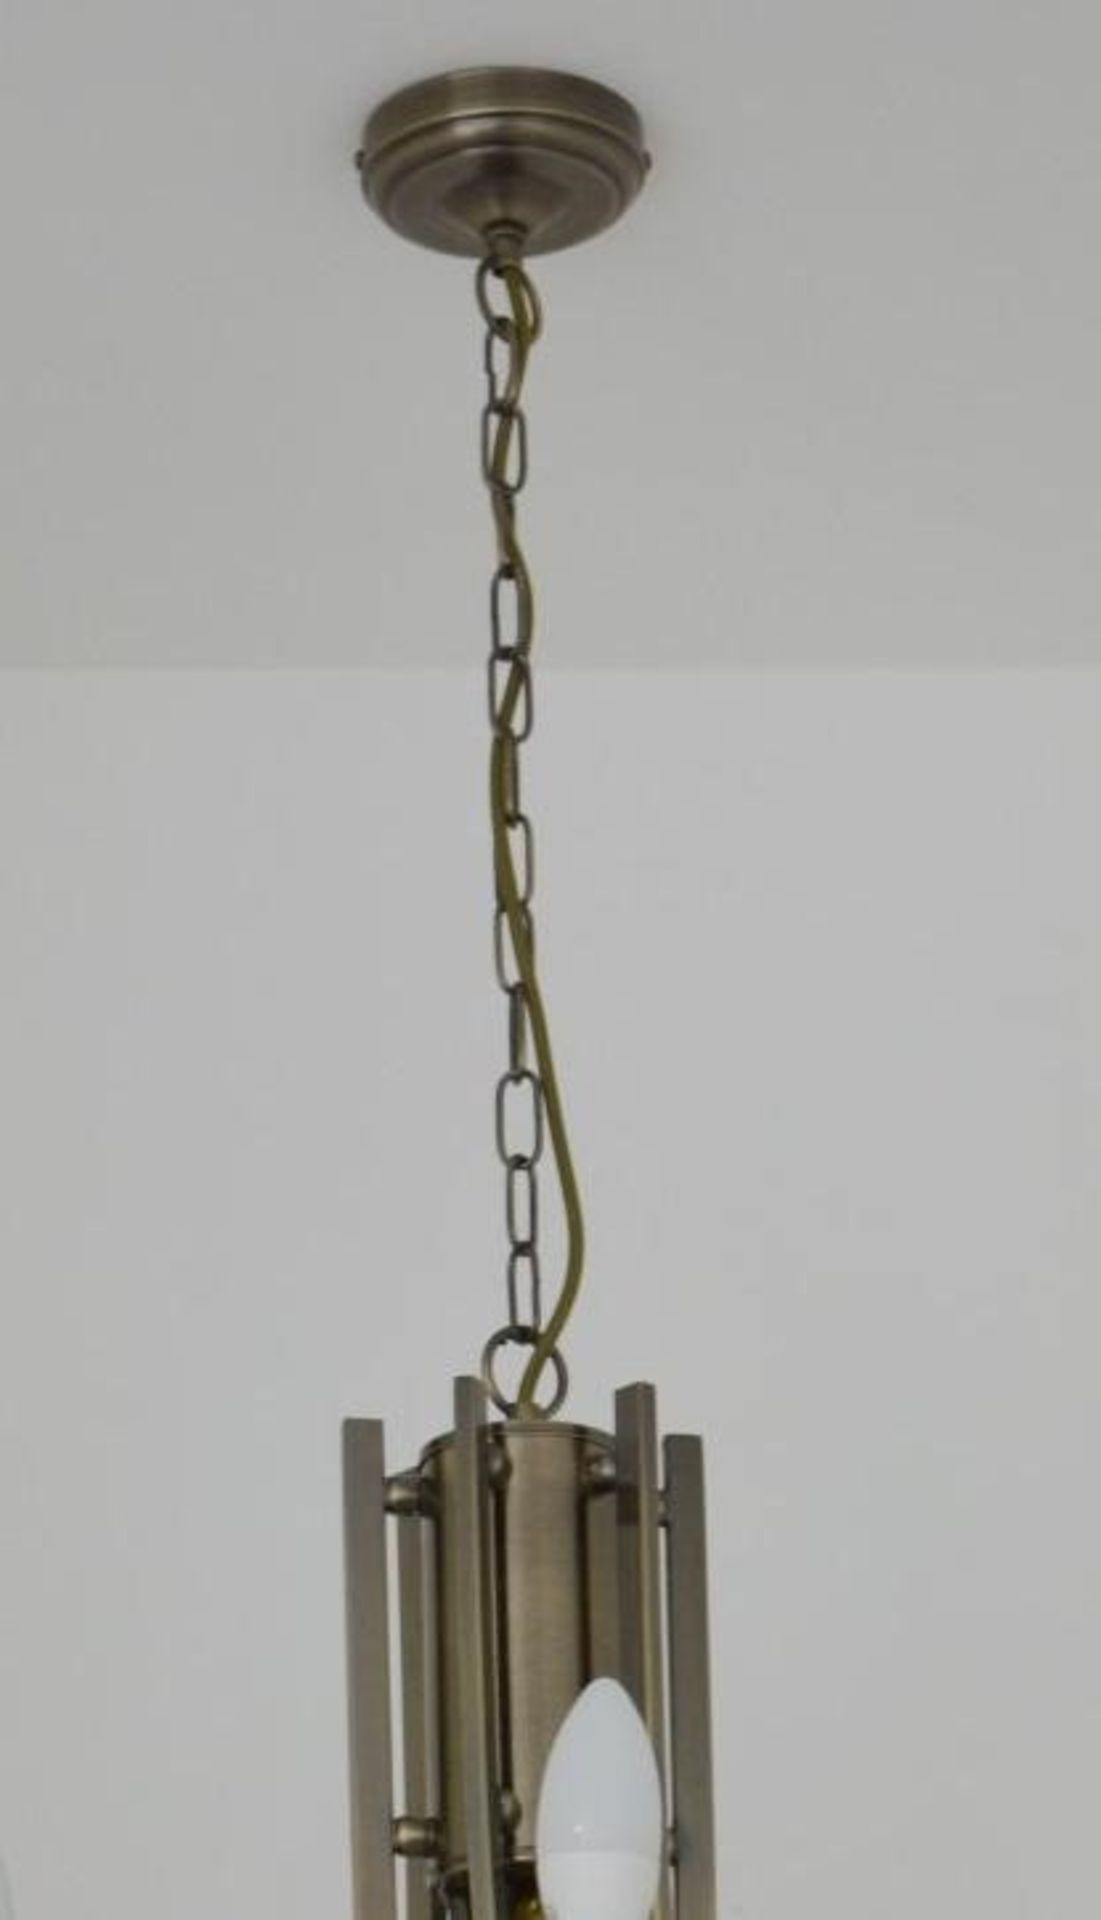 1 x Ascona Antique Brass 12-Light Fitting With Clear Glass Sconces - Ex Display Stock - CL298 - Ref: - Image 2 of 6